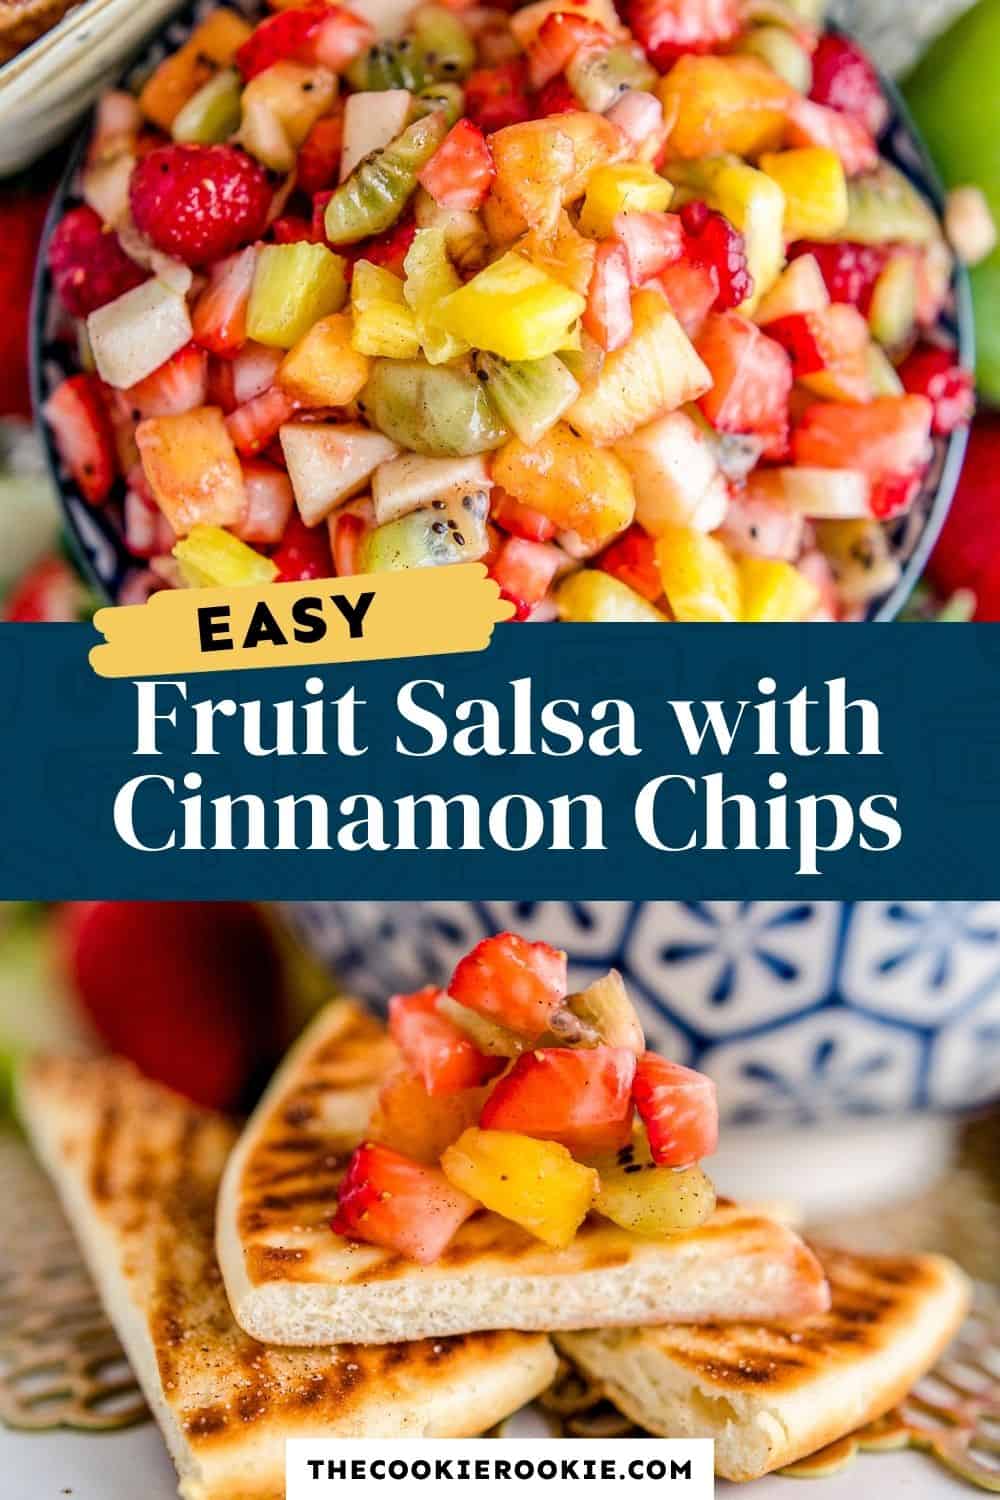 Fruit Salsa with Cinnamon Chips Recipe - The Cookie Rookie®